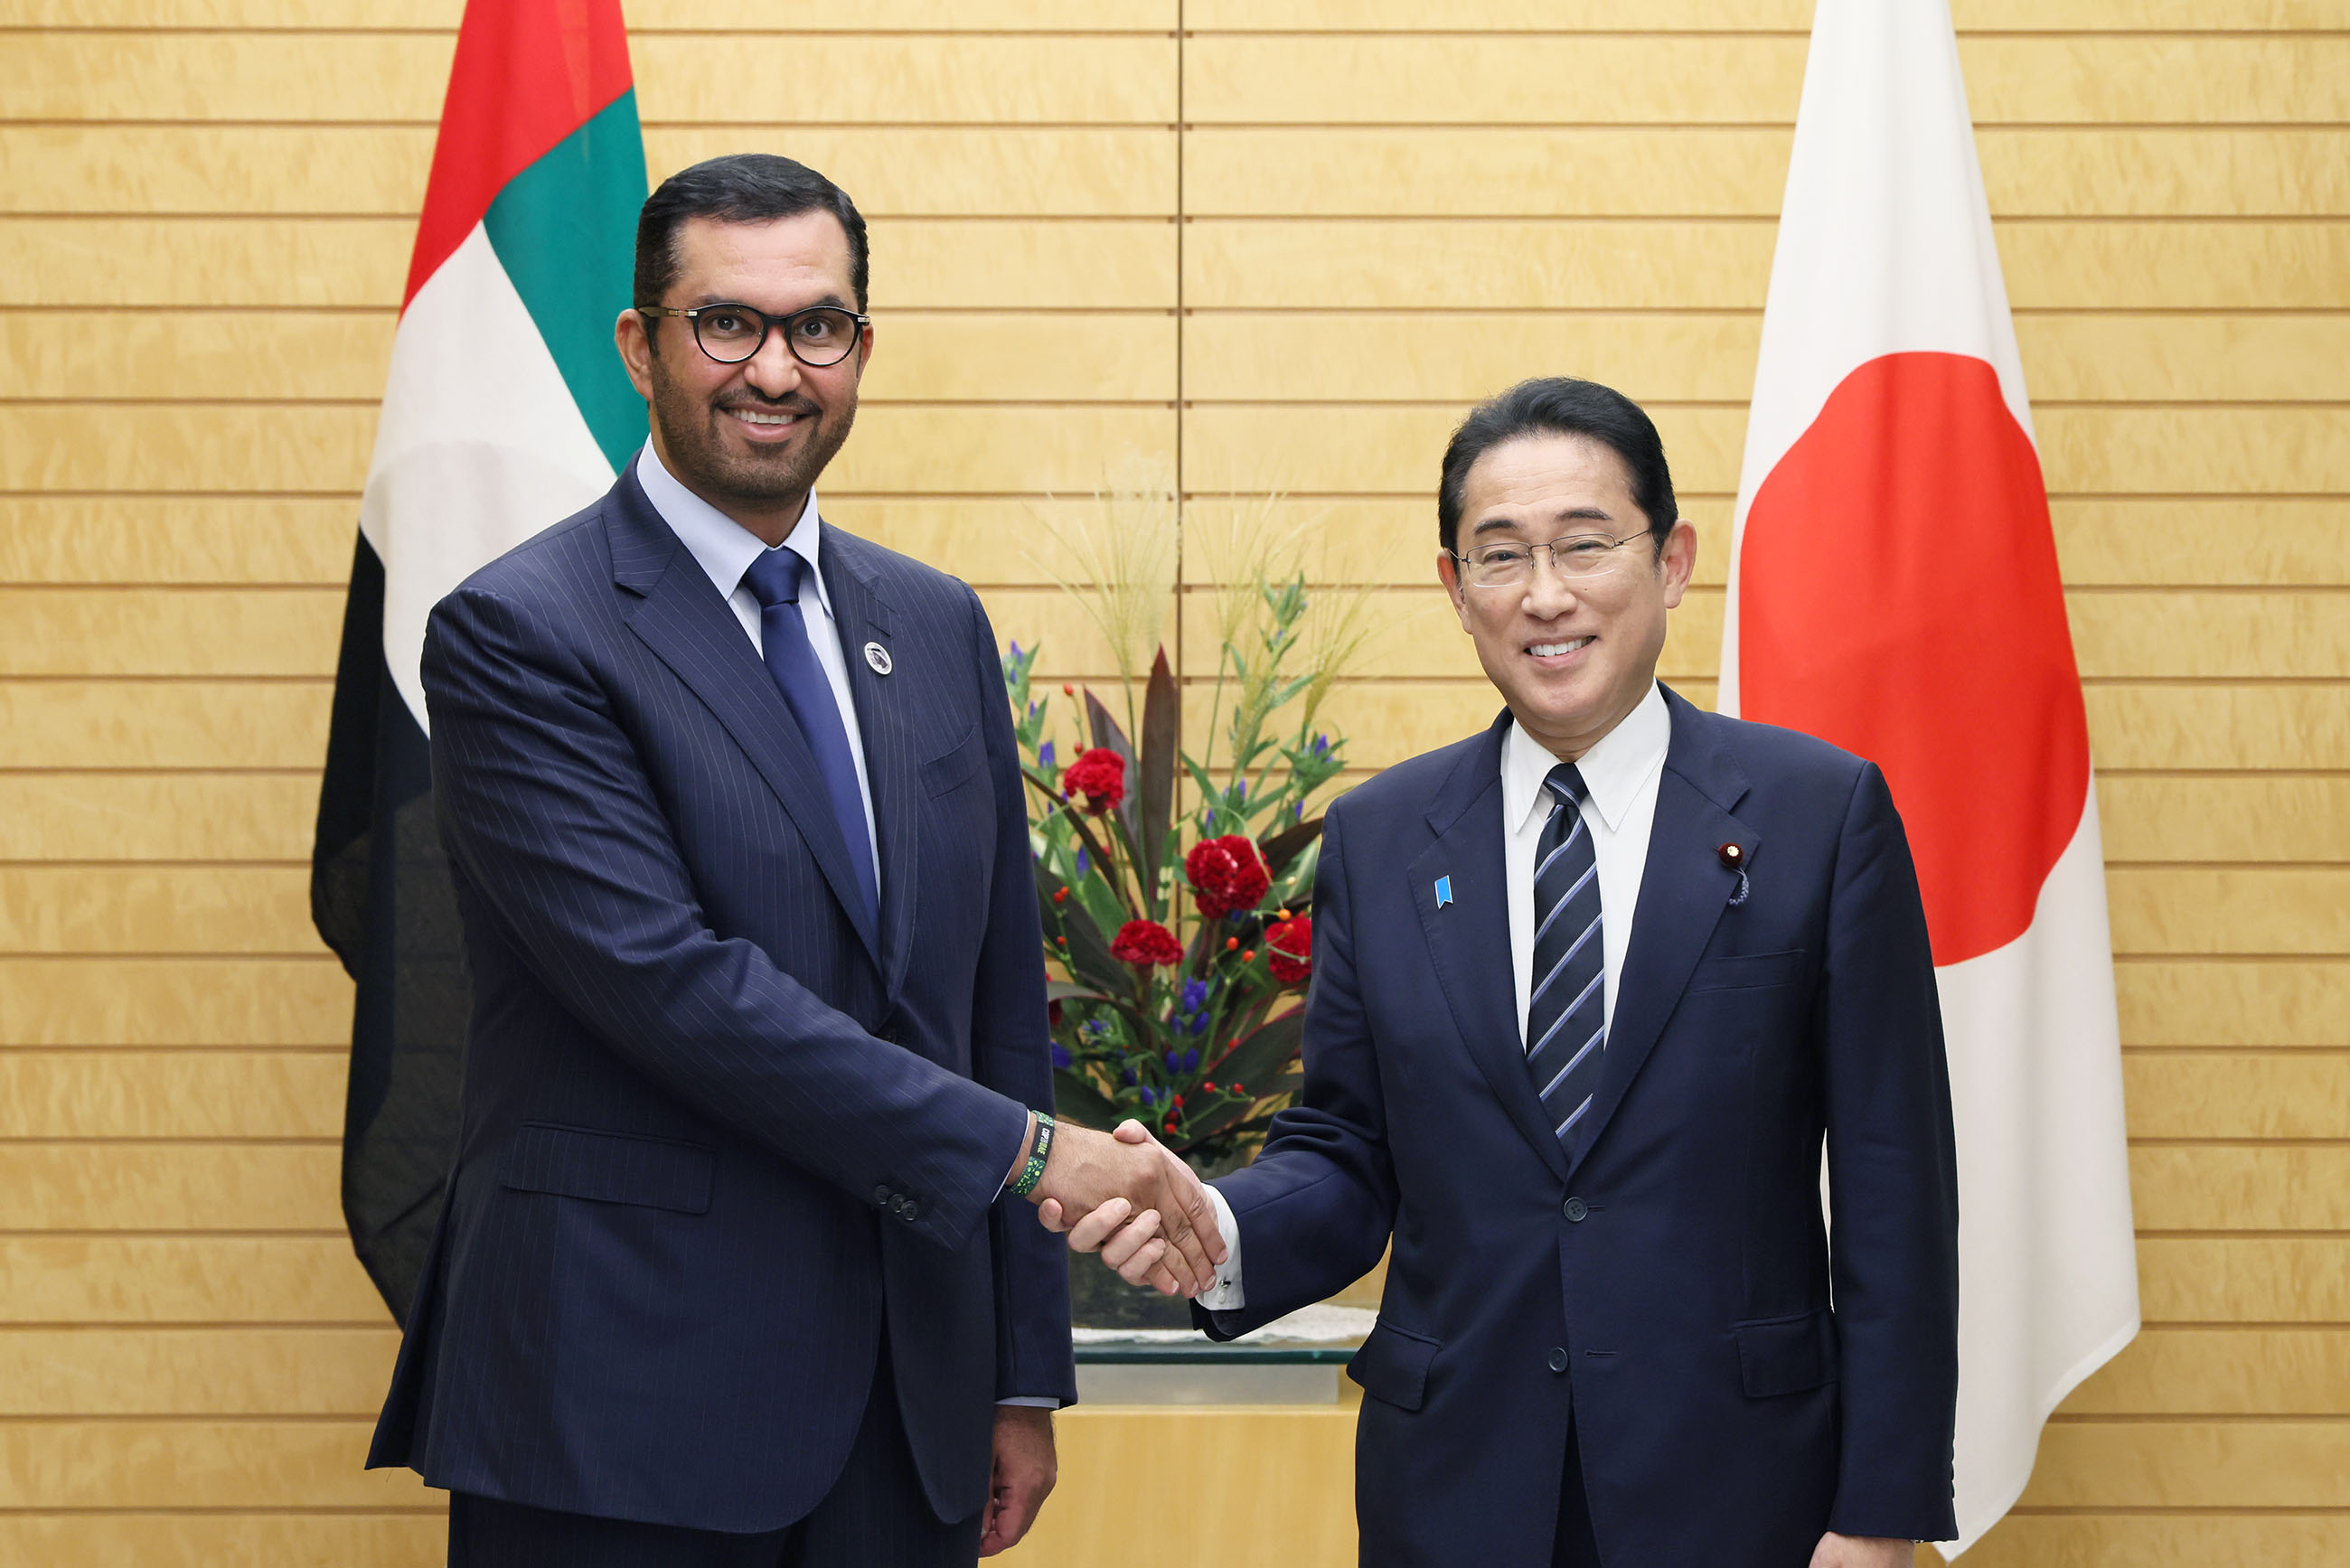 Courtesy Call from Minister of Industry and Advanced Technology and Special Envoy to Japan Sultan Al Jaber of the United Arab Emirates